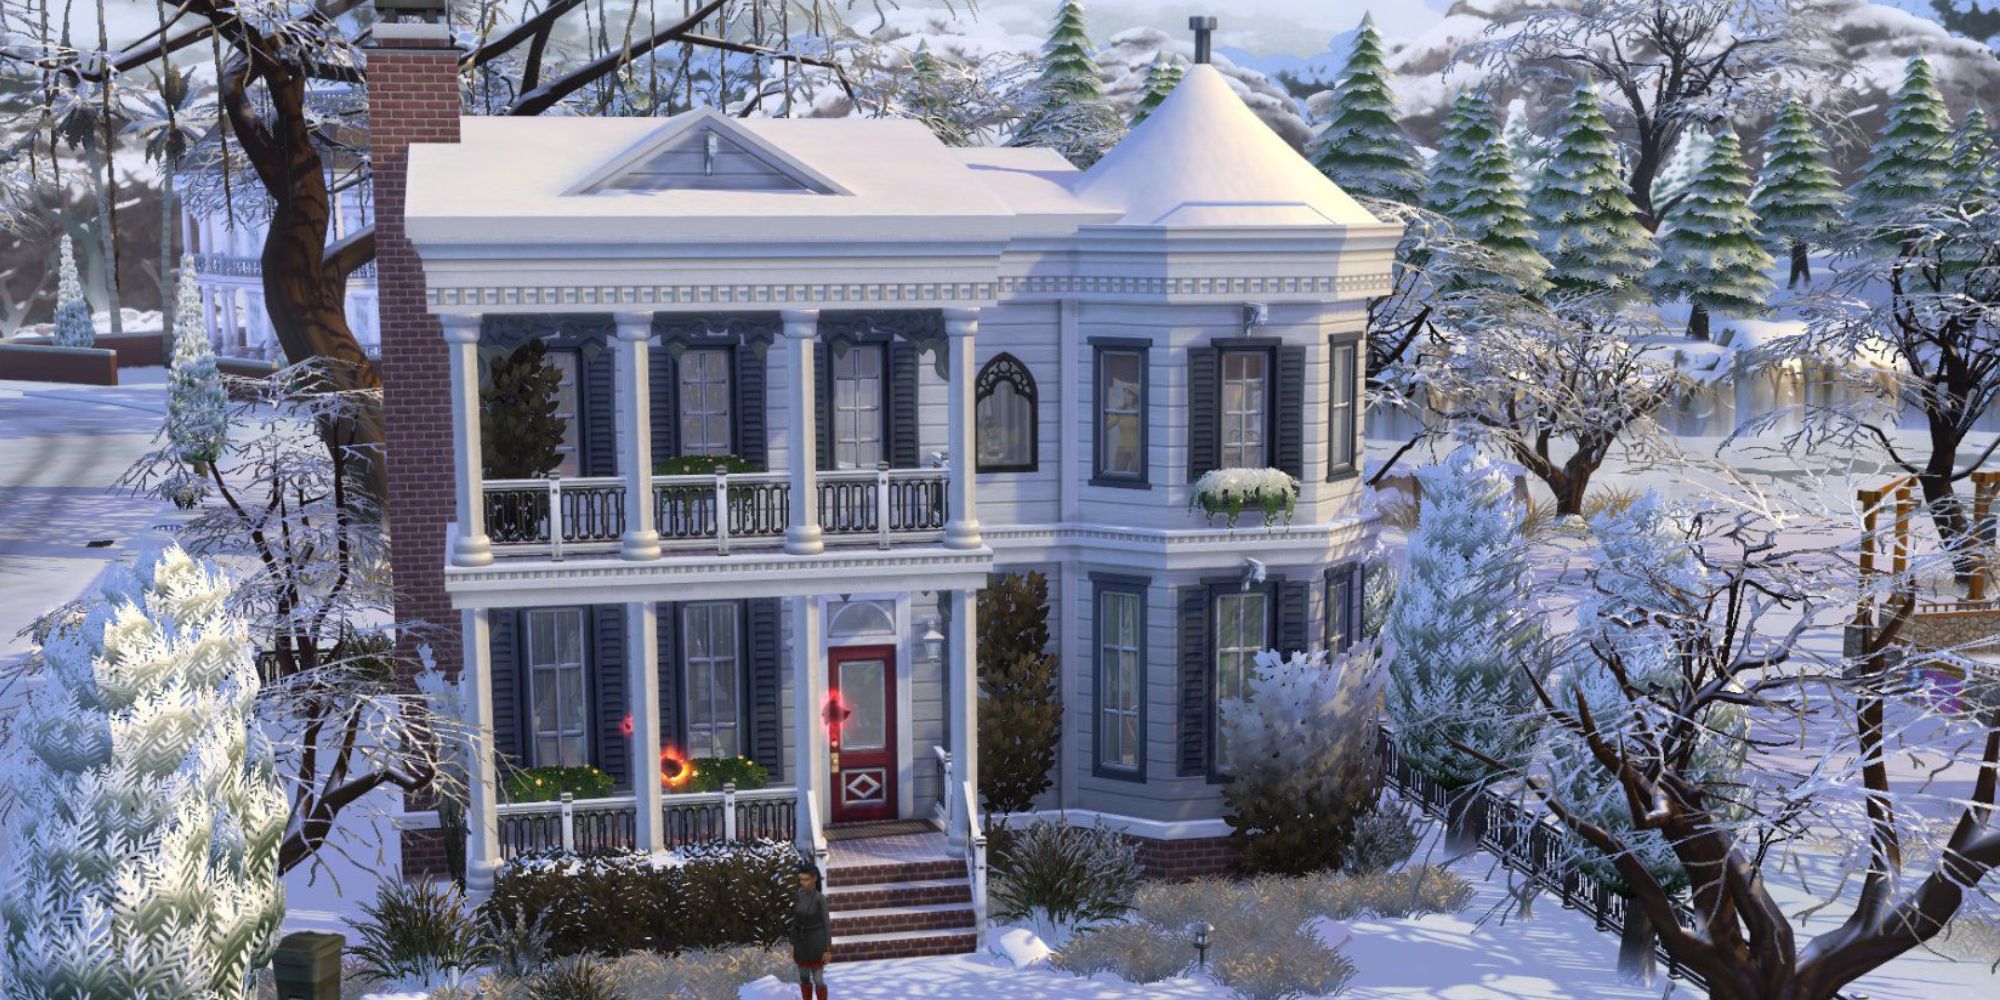 The Sims 4 Paranormal Stuff Duplantier Mansion win the snow with spectres outside